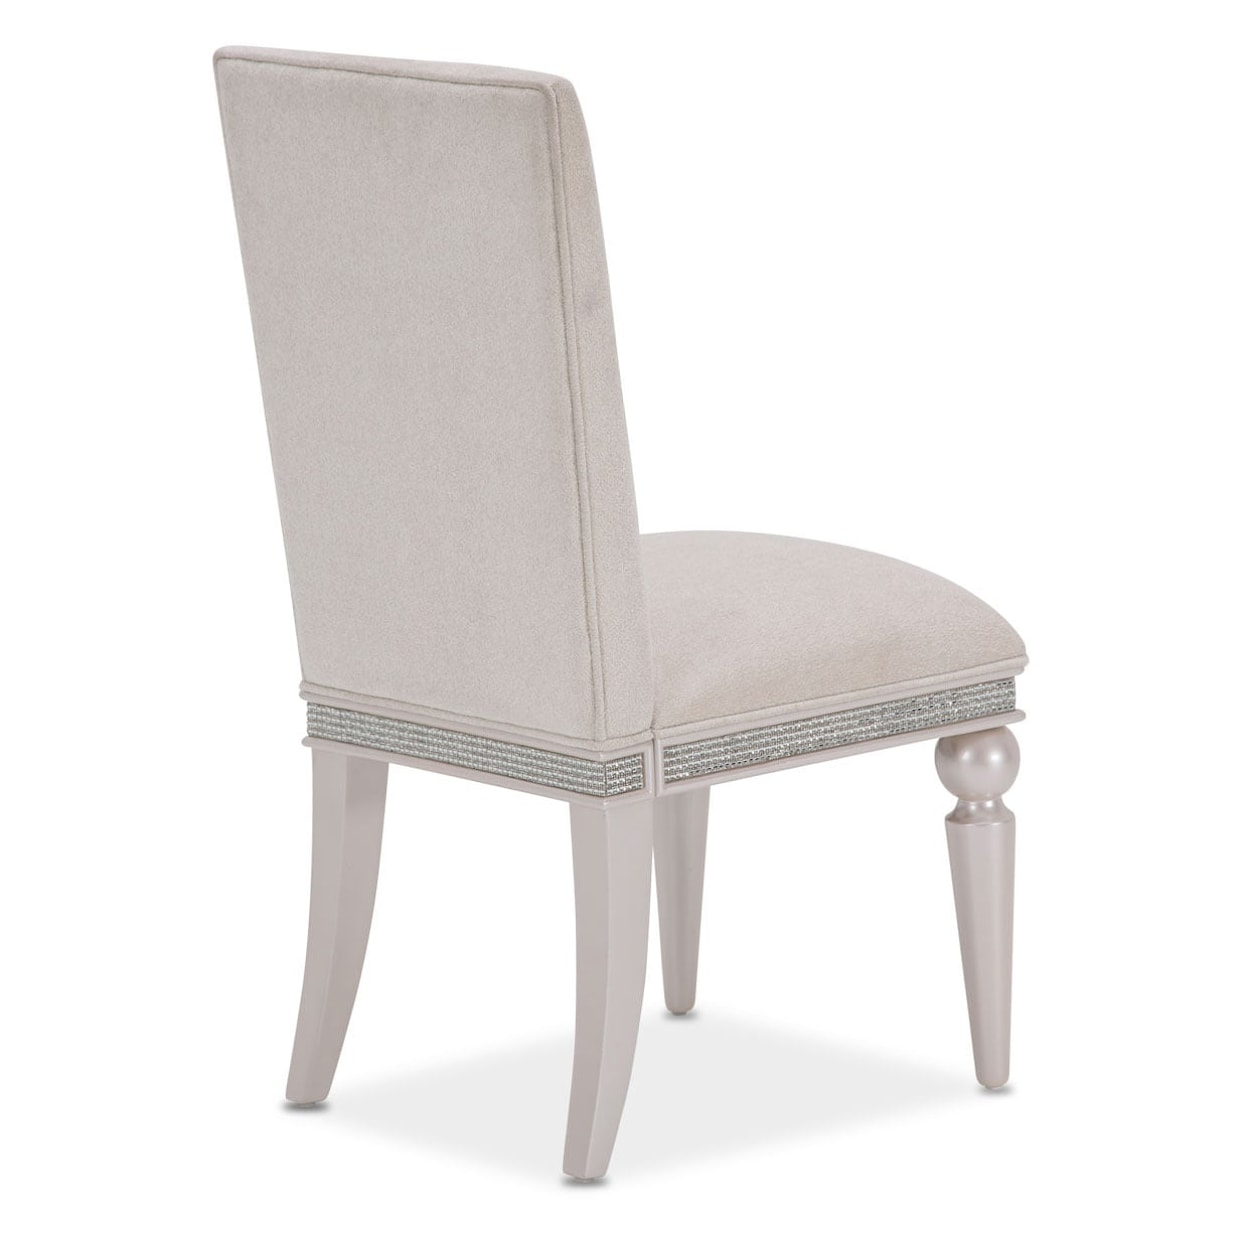 Michael Amini Glimmering Heights Upholstered Dining Side Chair